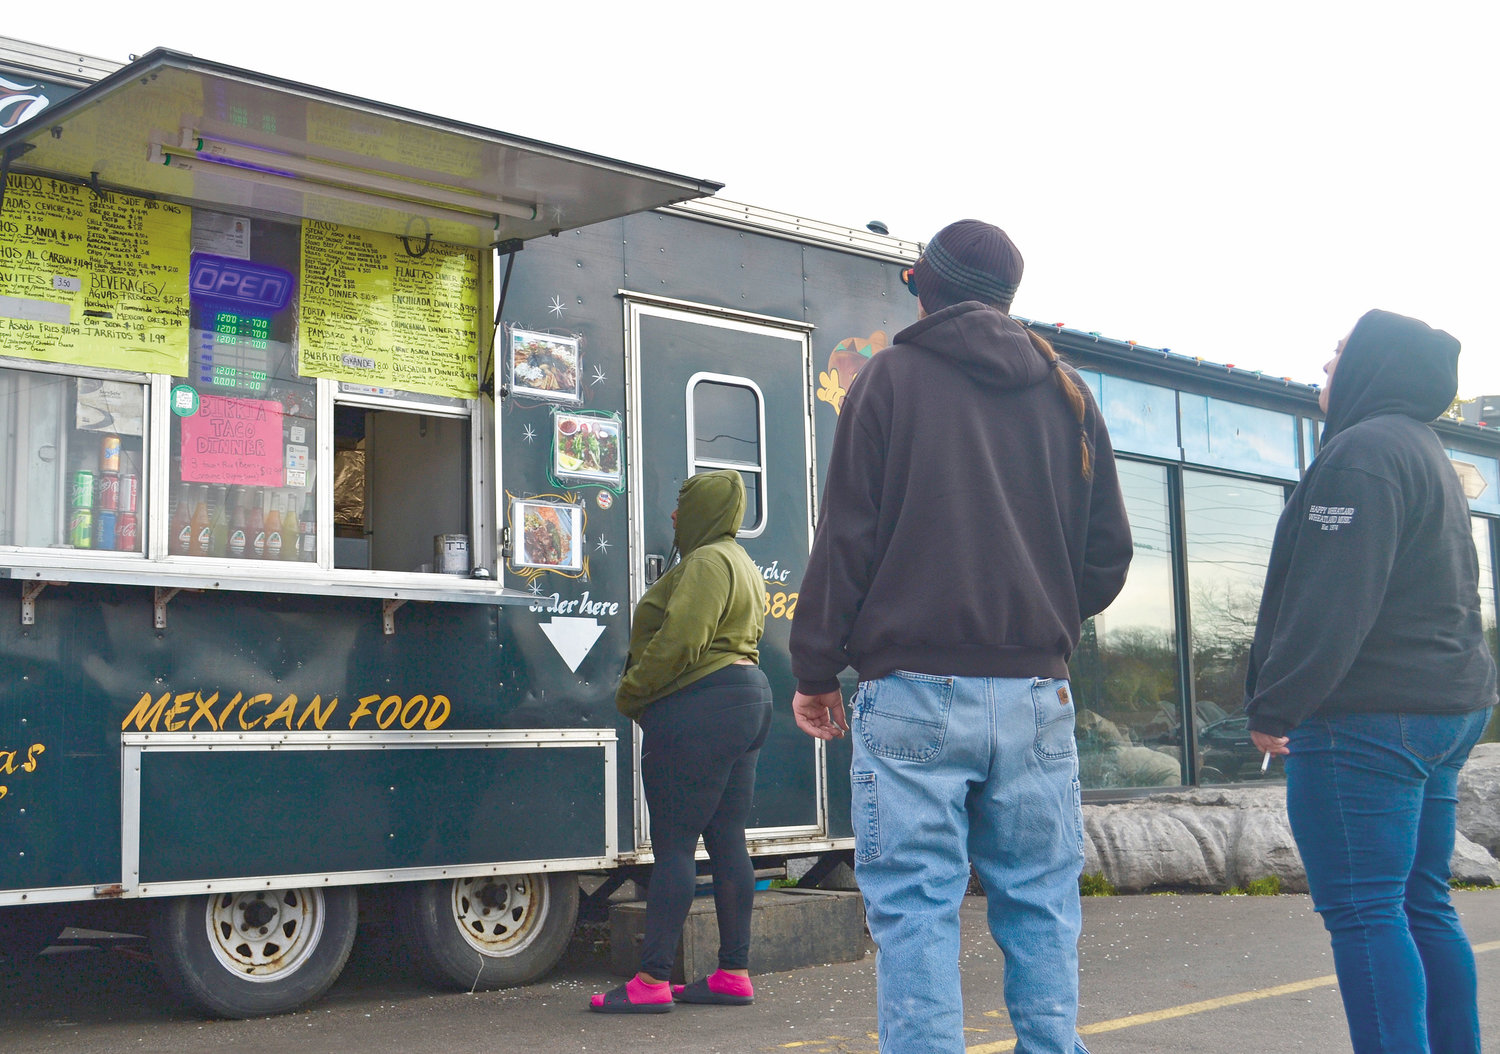 Customers wait to order food at the Taquero Mucho food truck on Cedar Street.